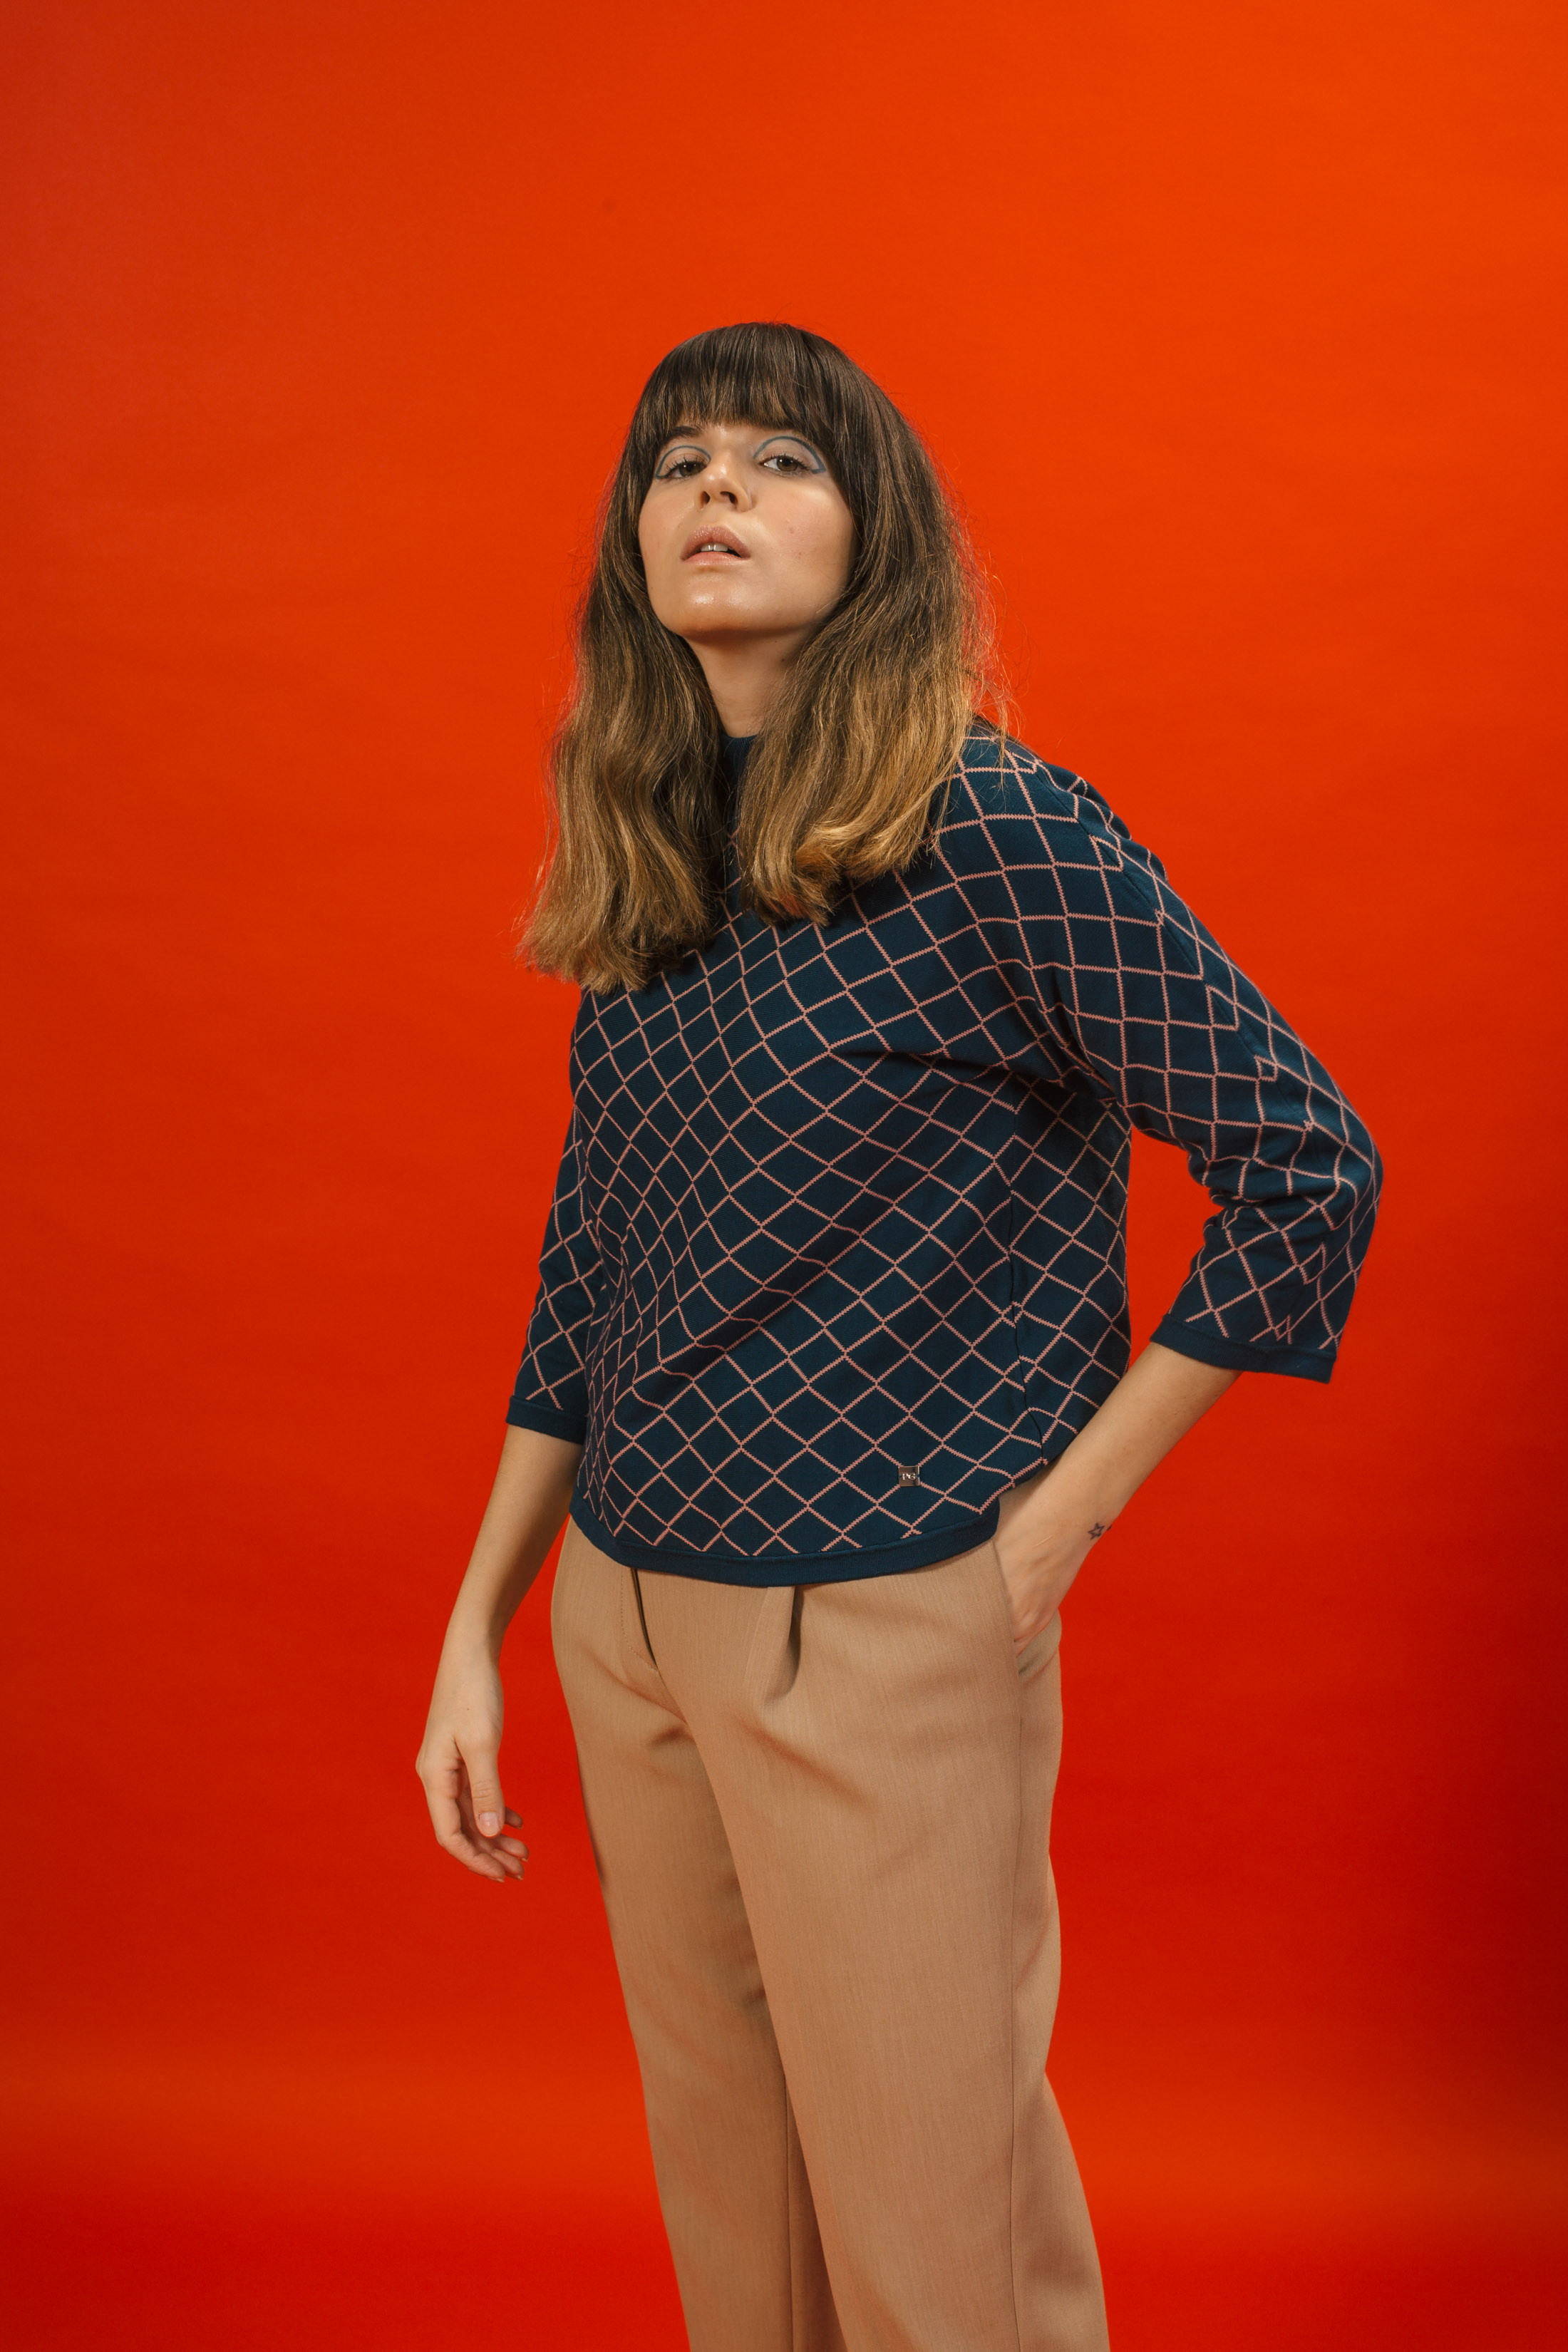 Maristella wears a knit sweater and pants from Purificación García